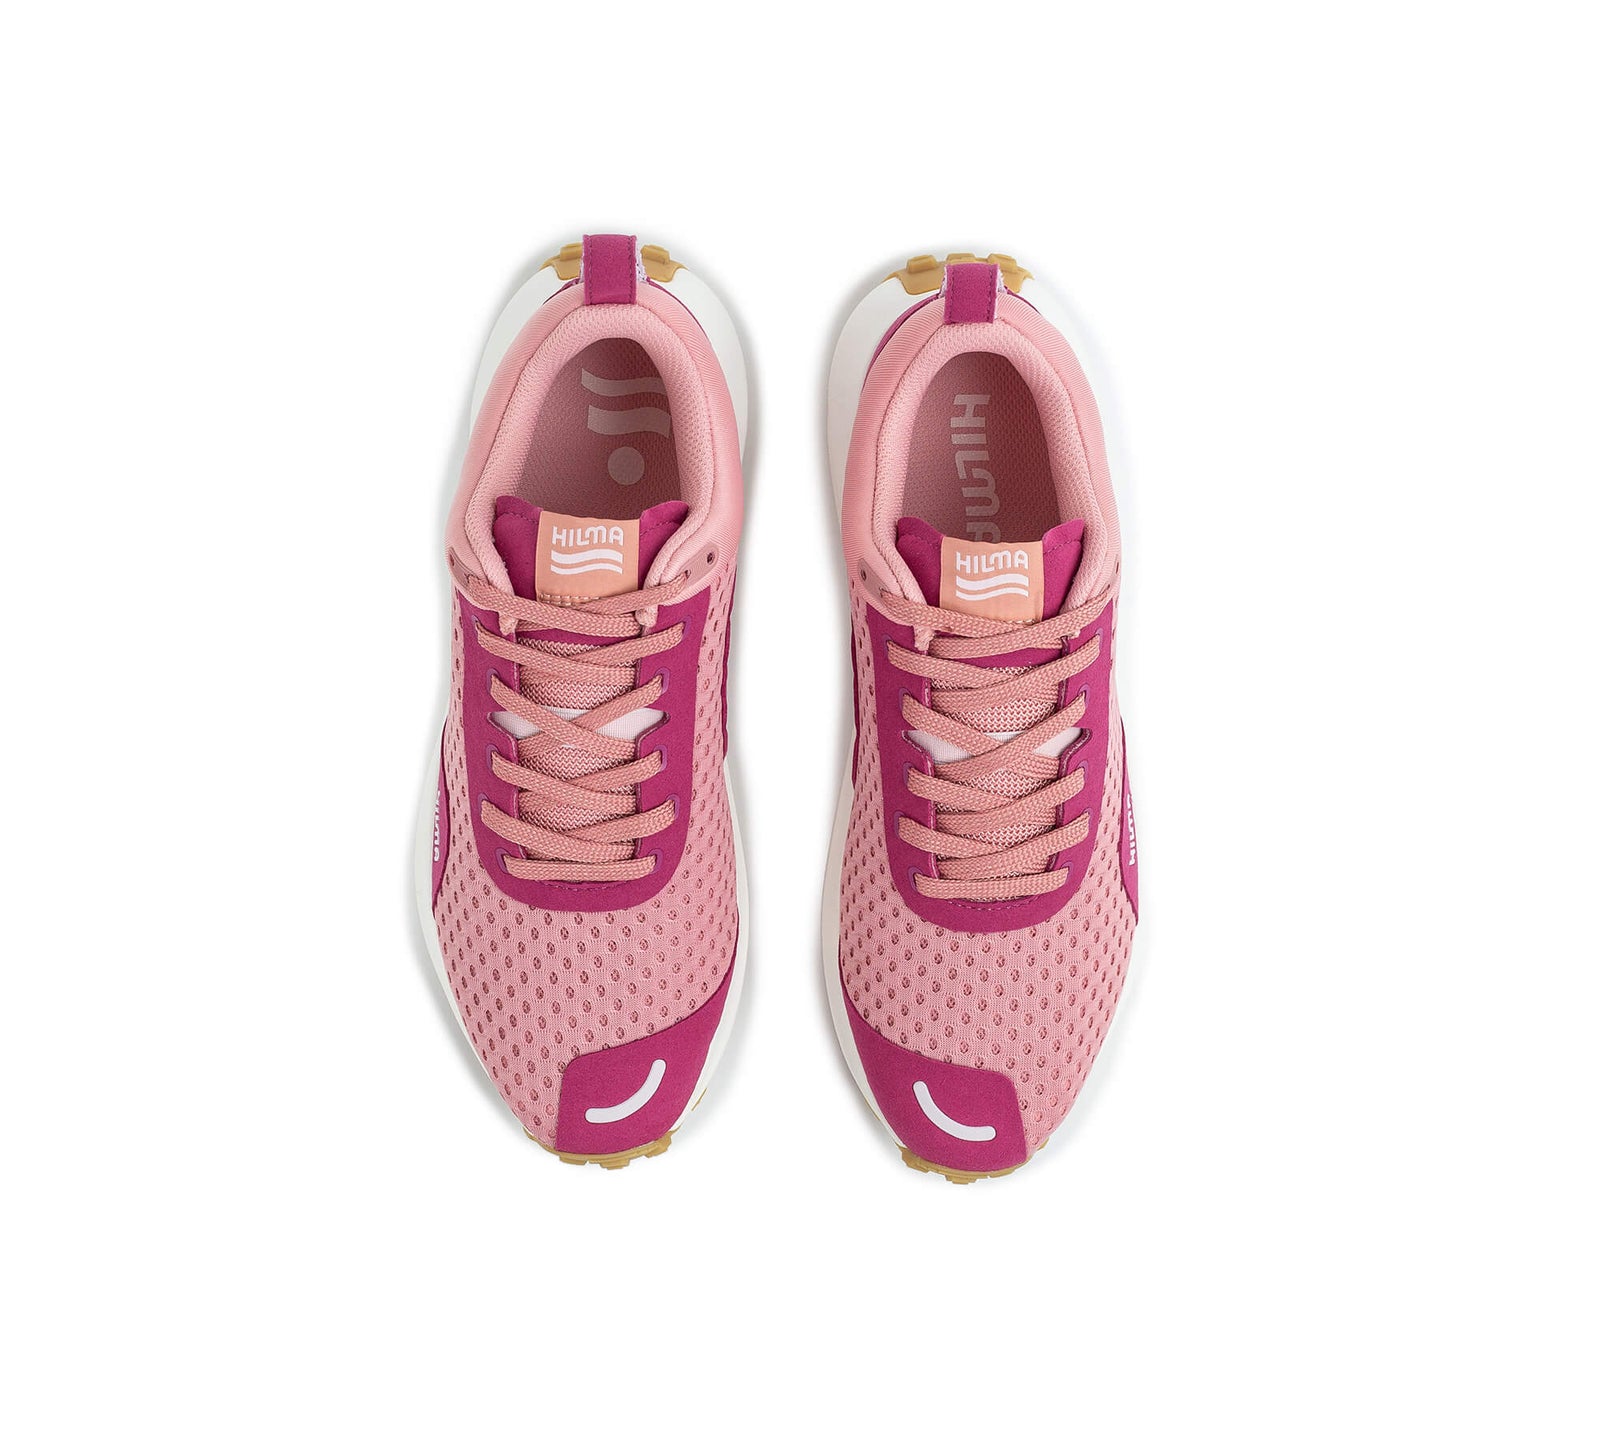 Top down view of a pair of the Everywhere Hilma Running shoe in Rose Tan